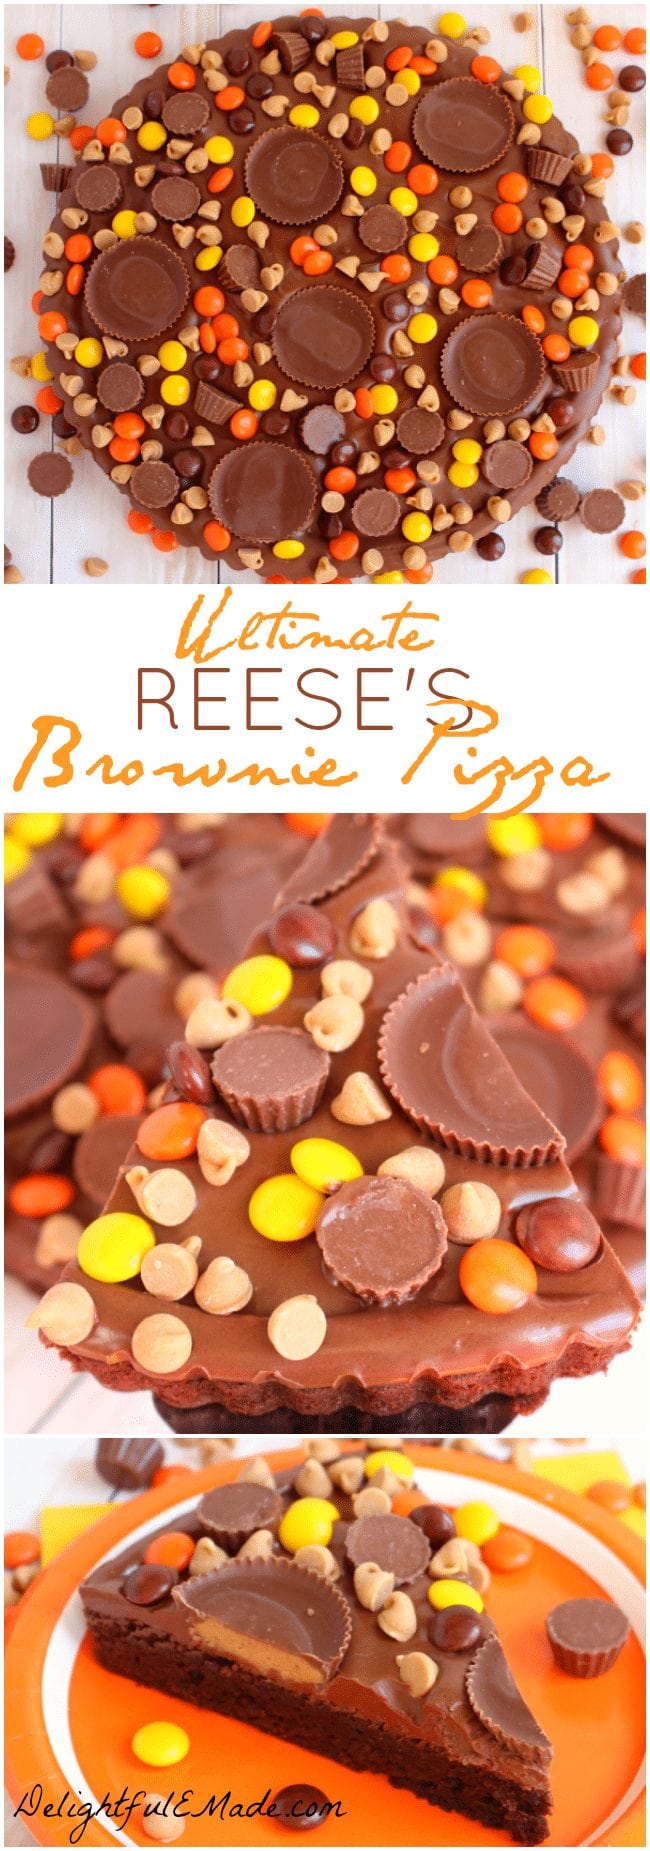 Loaded with REESE'S Pieces, Peanut Butter Cups, Mini's, Peanut Butter Chips, and a chocolate peanut butter frosting, this brownie pizza is perfect! My favorite post from last week's Dream Create Inspire Linky Party!